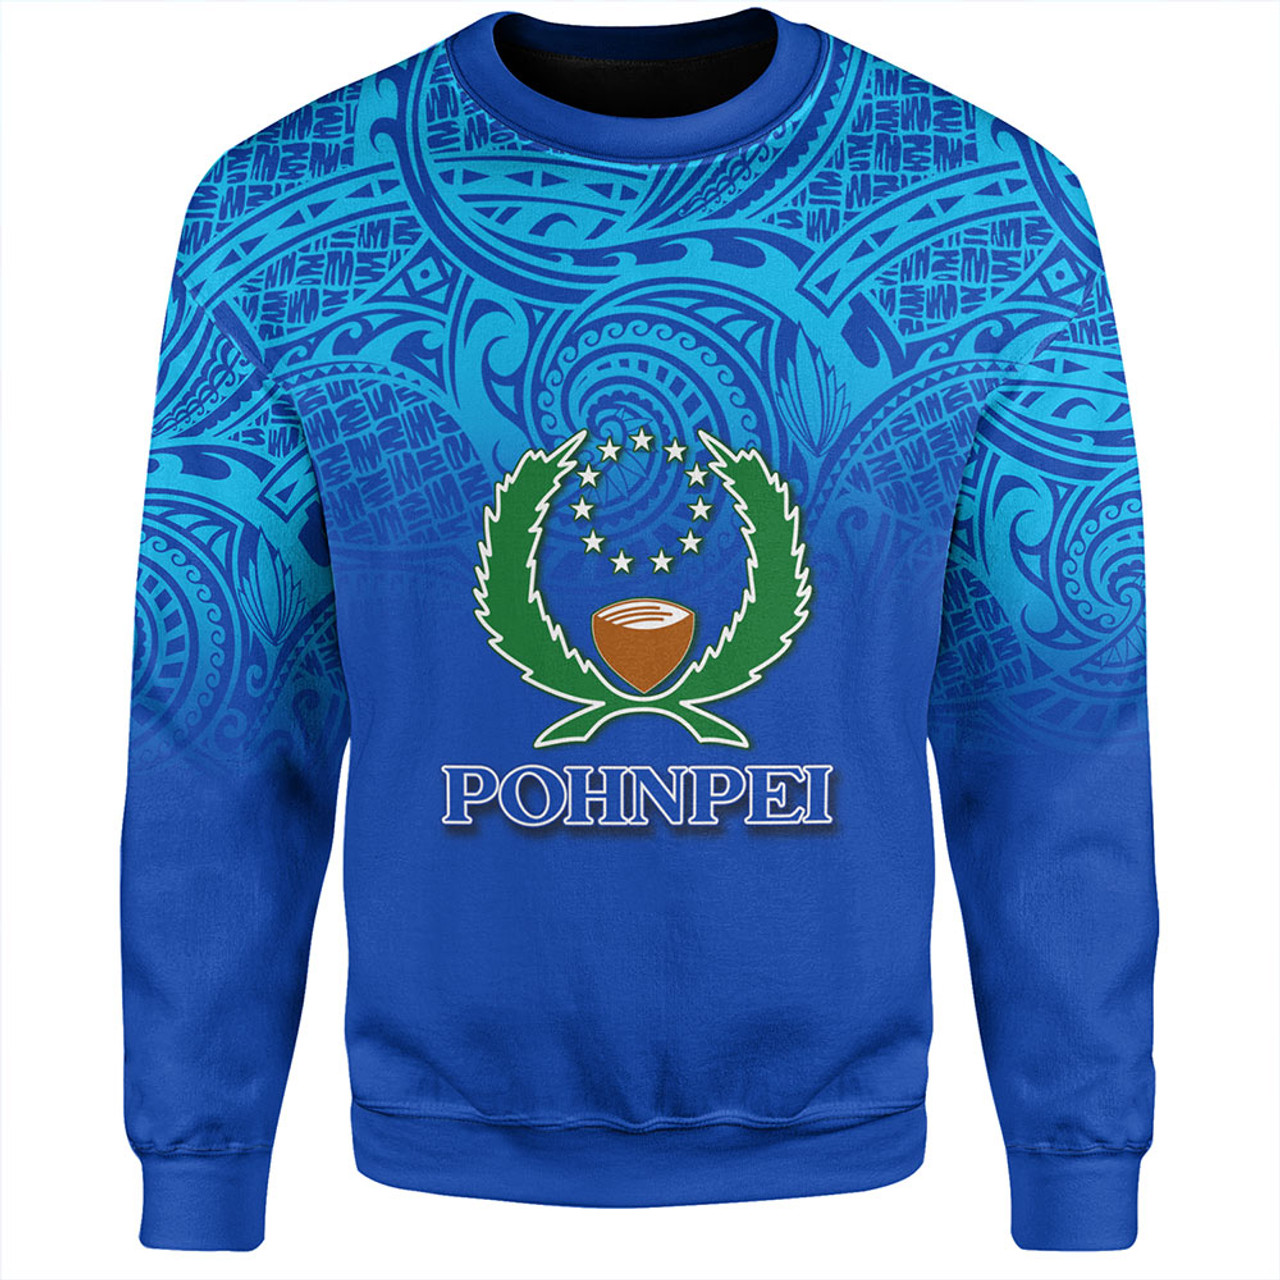 Pohnpei State Sweatshirt Flag Color With Traditional Patterns